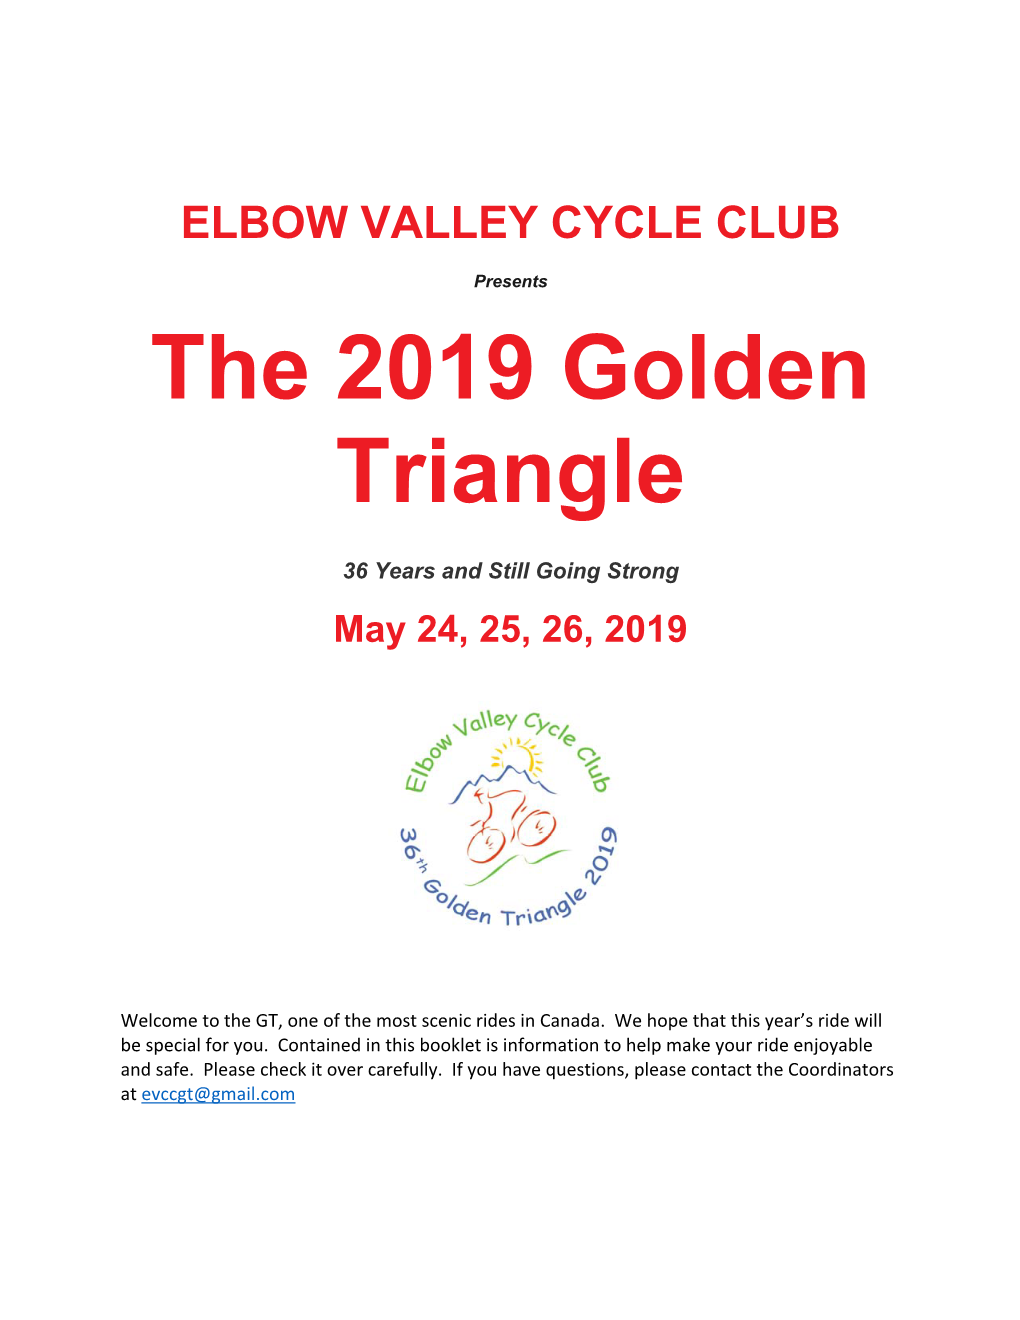 The 2019 Golden Triangle